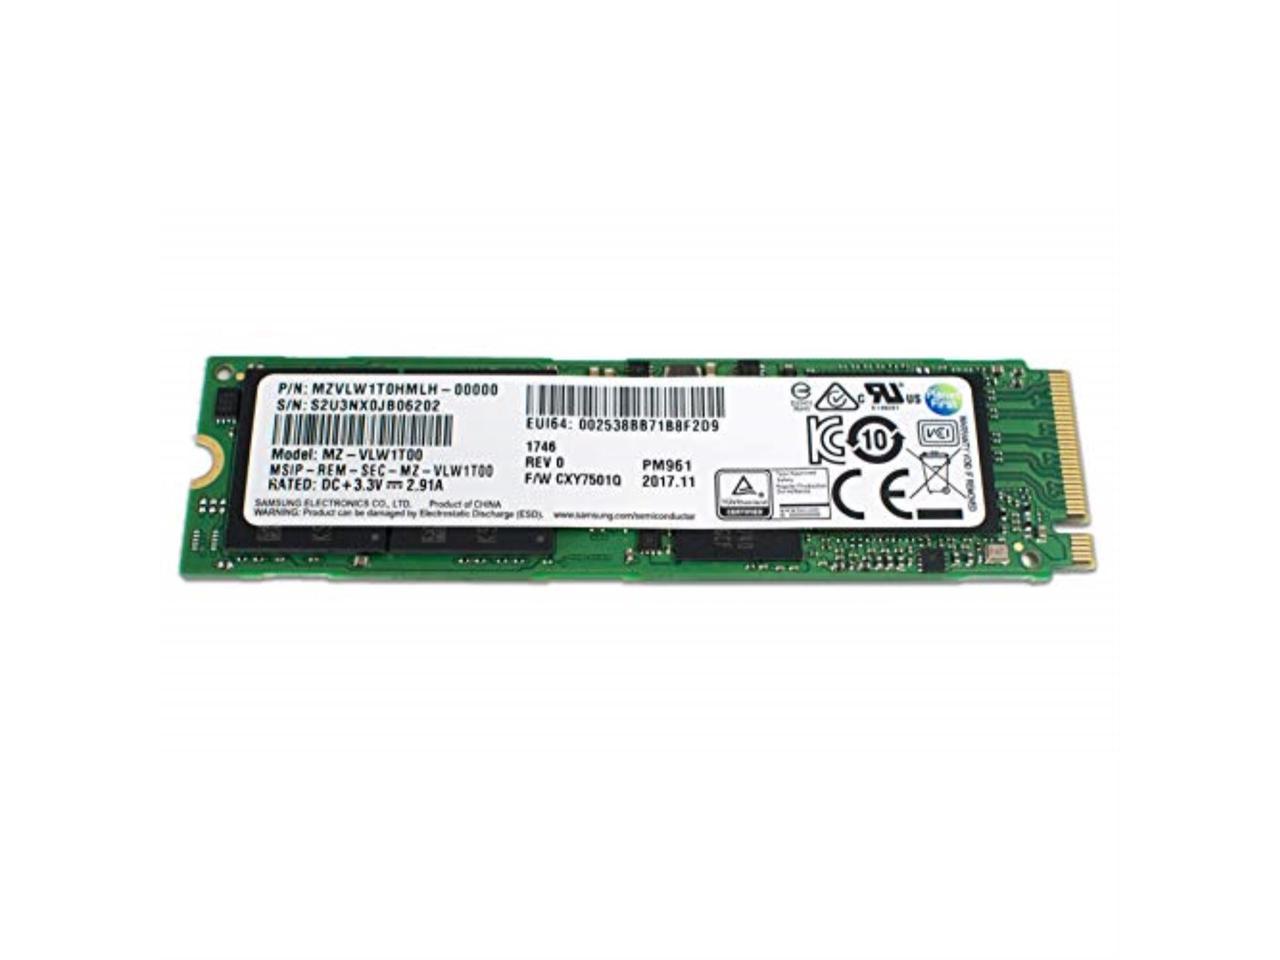 Lenovo Samsung 960 Pro PM961 - 1TB NVMe M.2 NGFF SSD PCIe 3.0 x4 80mm  (2280) PCI Express M2 Gen3 Solid State Drive 00UP414